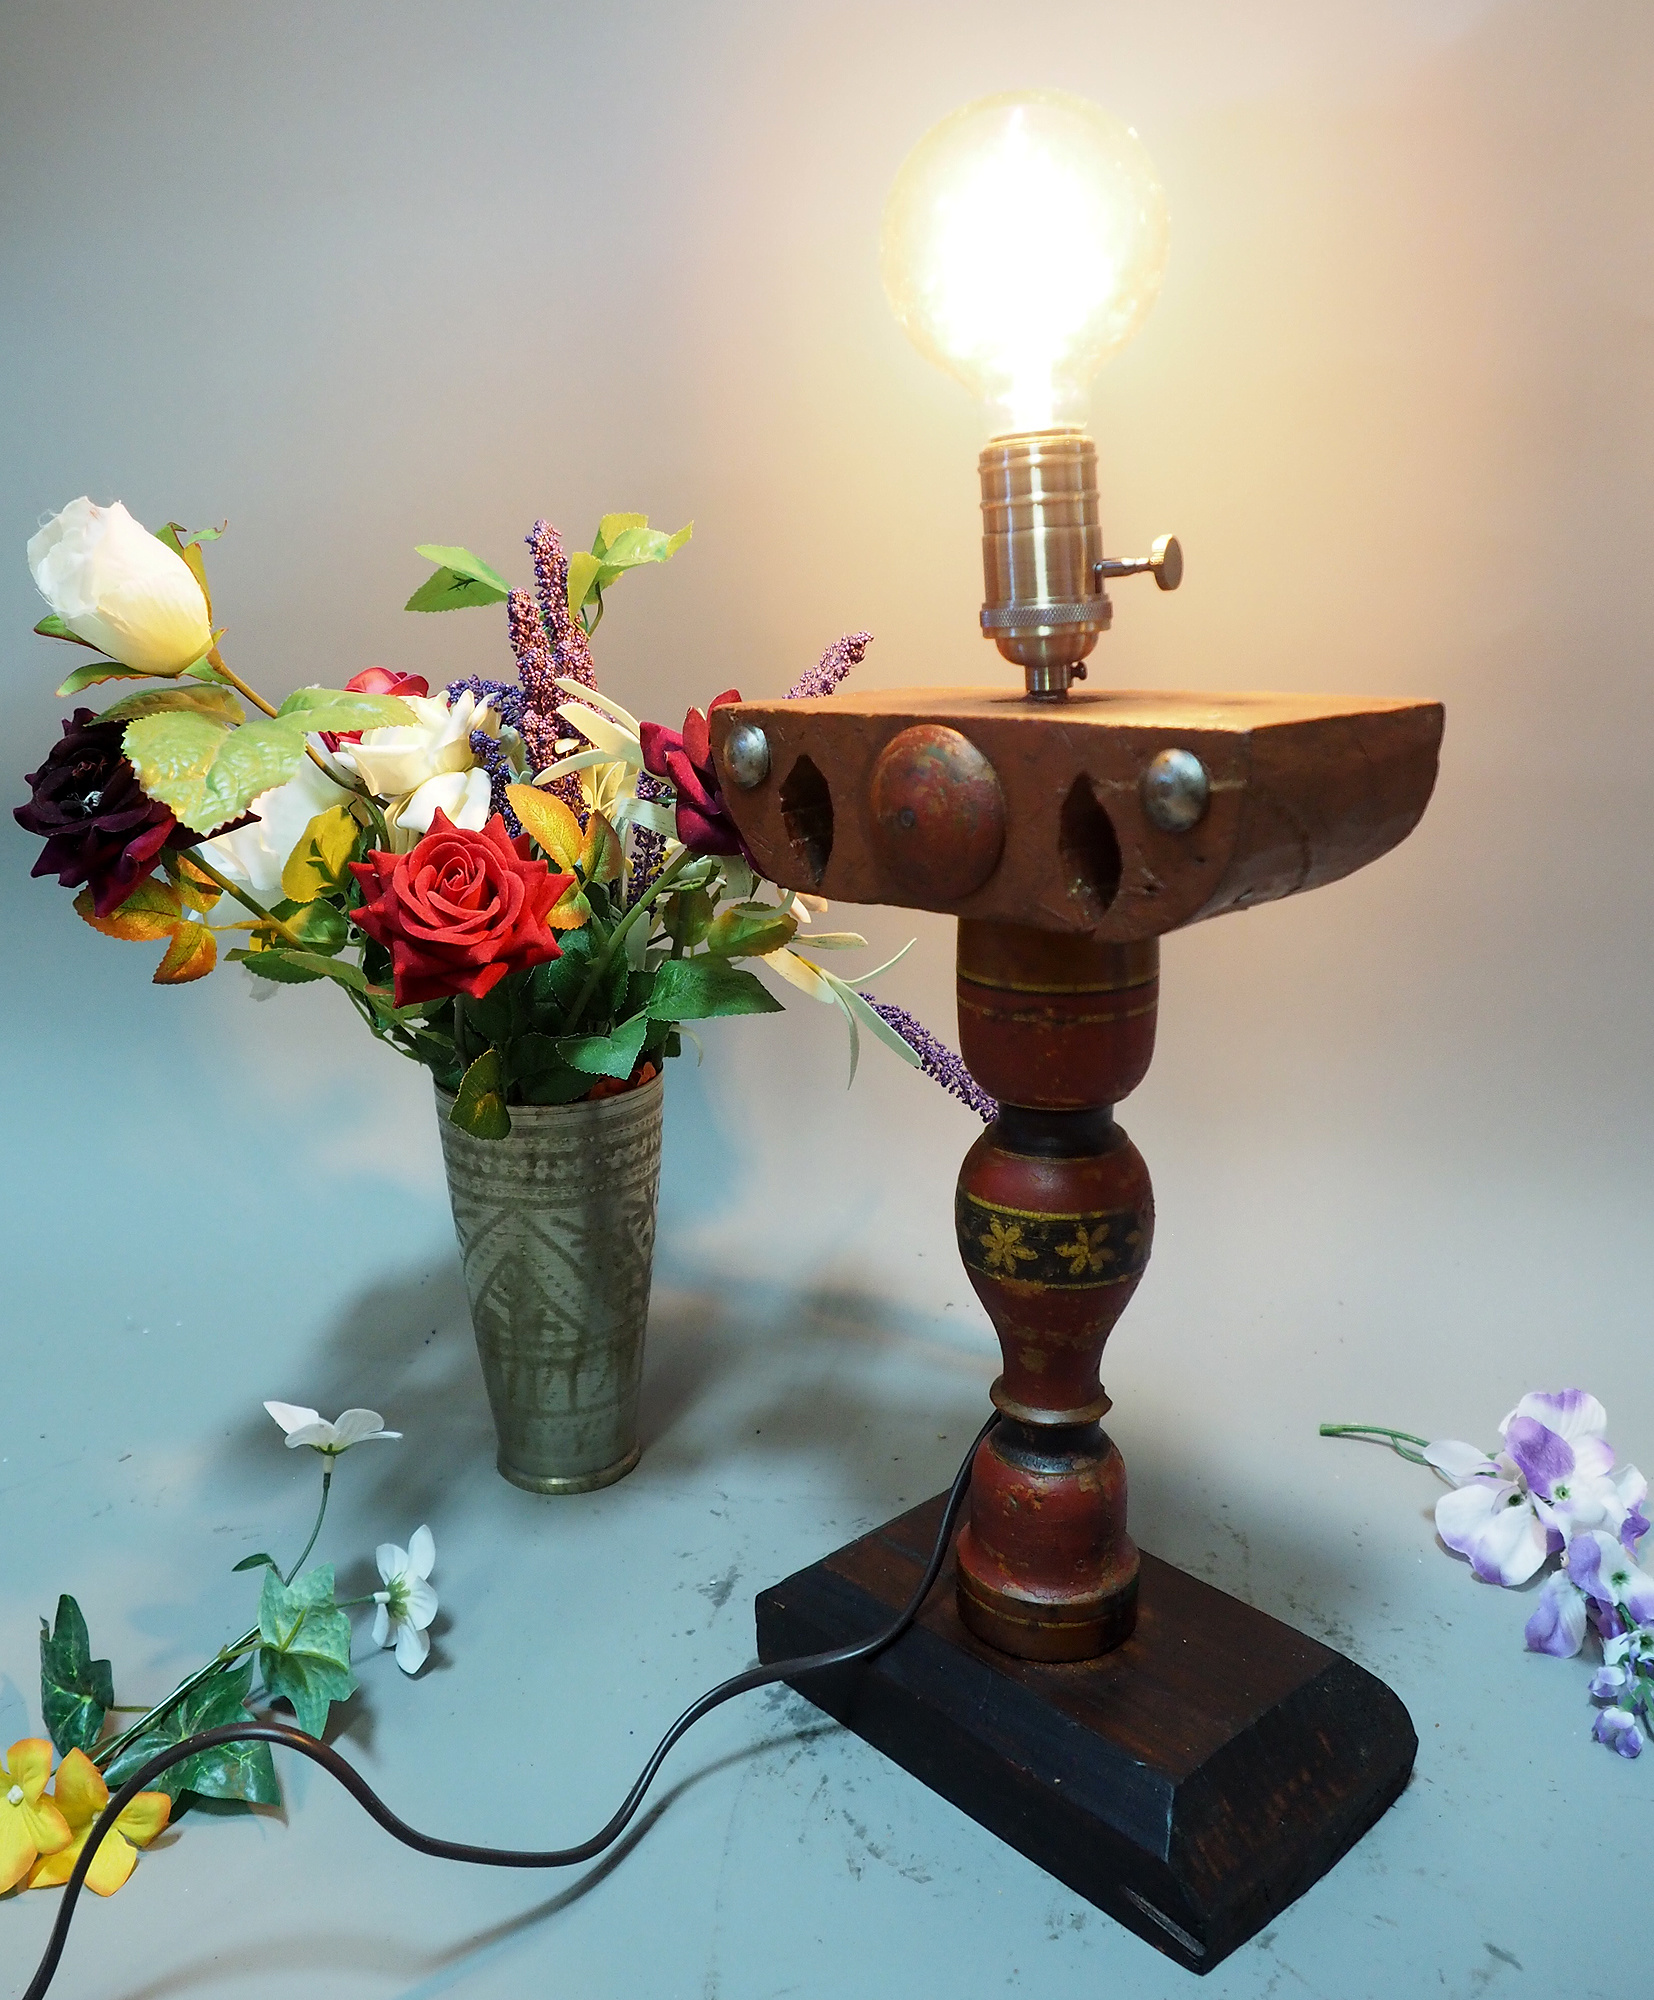 Antique handpainted stunning Vintage Lacquerware wooden Table Lamp with Vintage light fitting from Afghanistan / Pakistan No:21/7